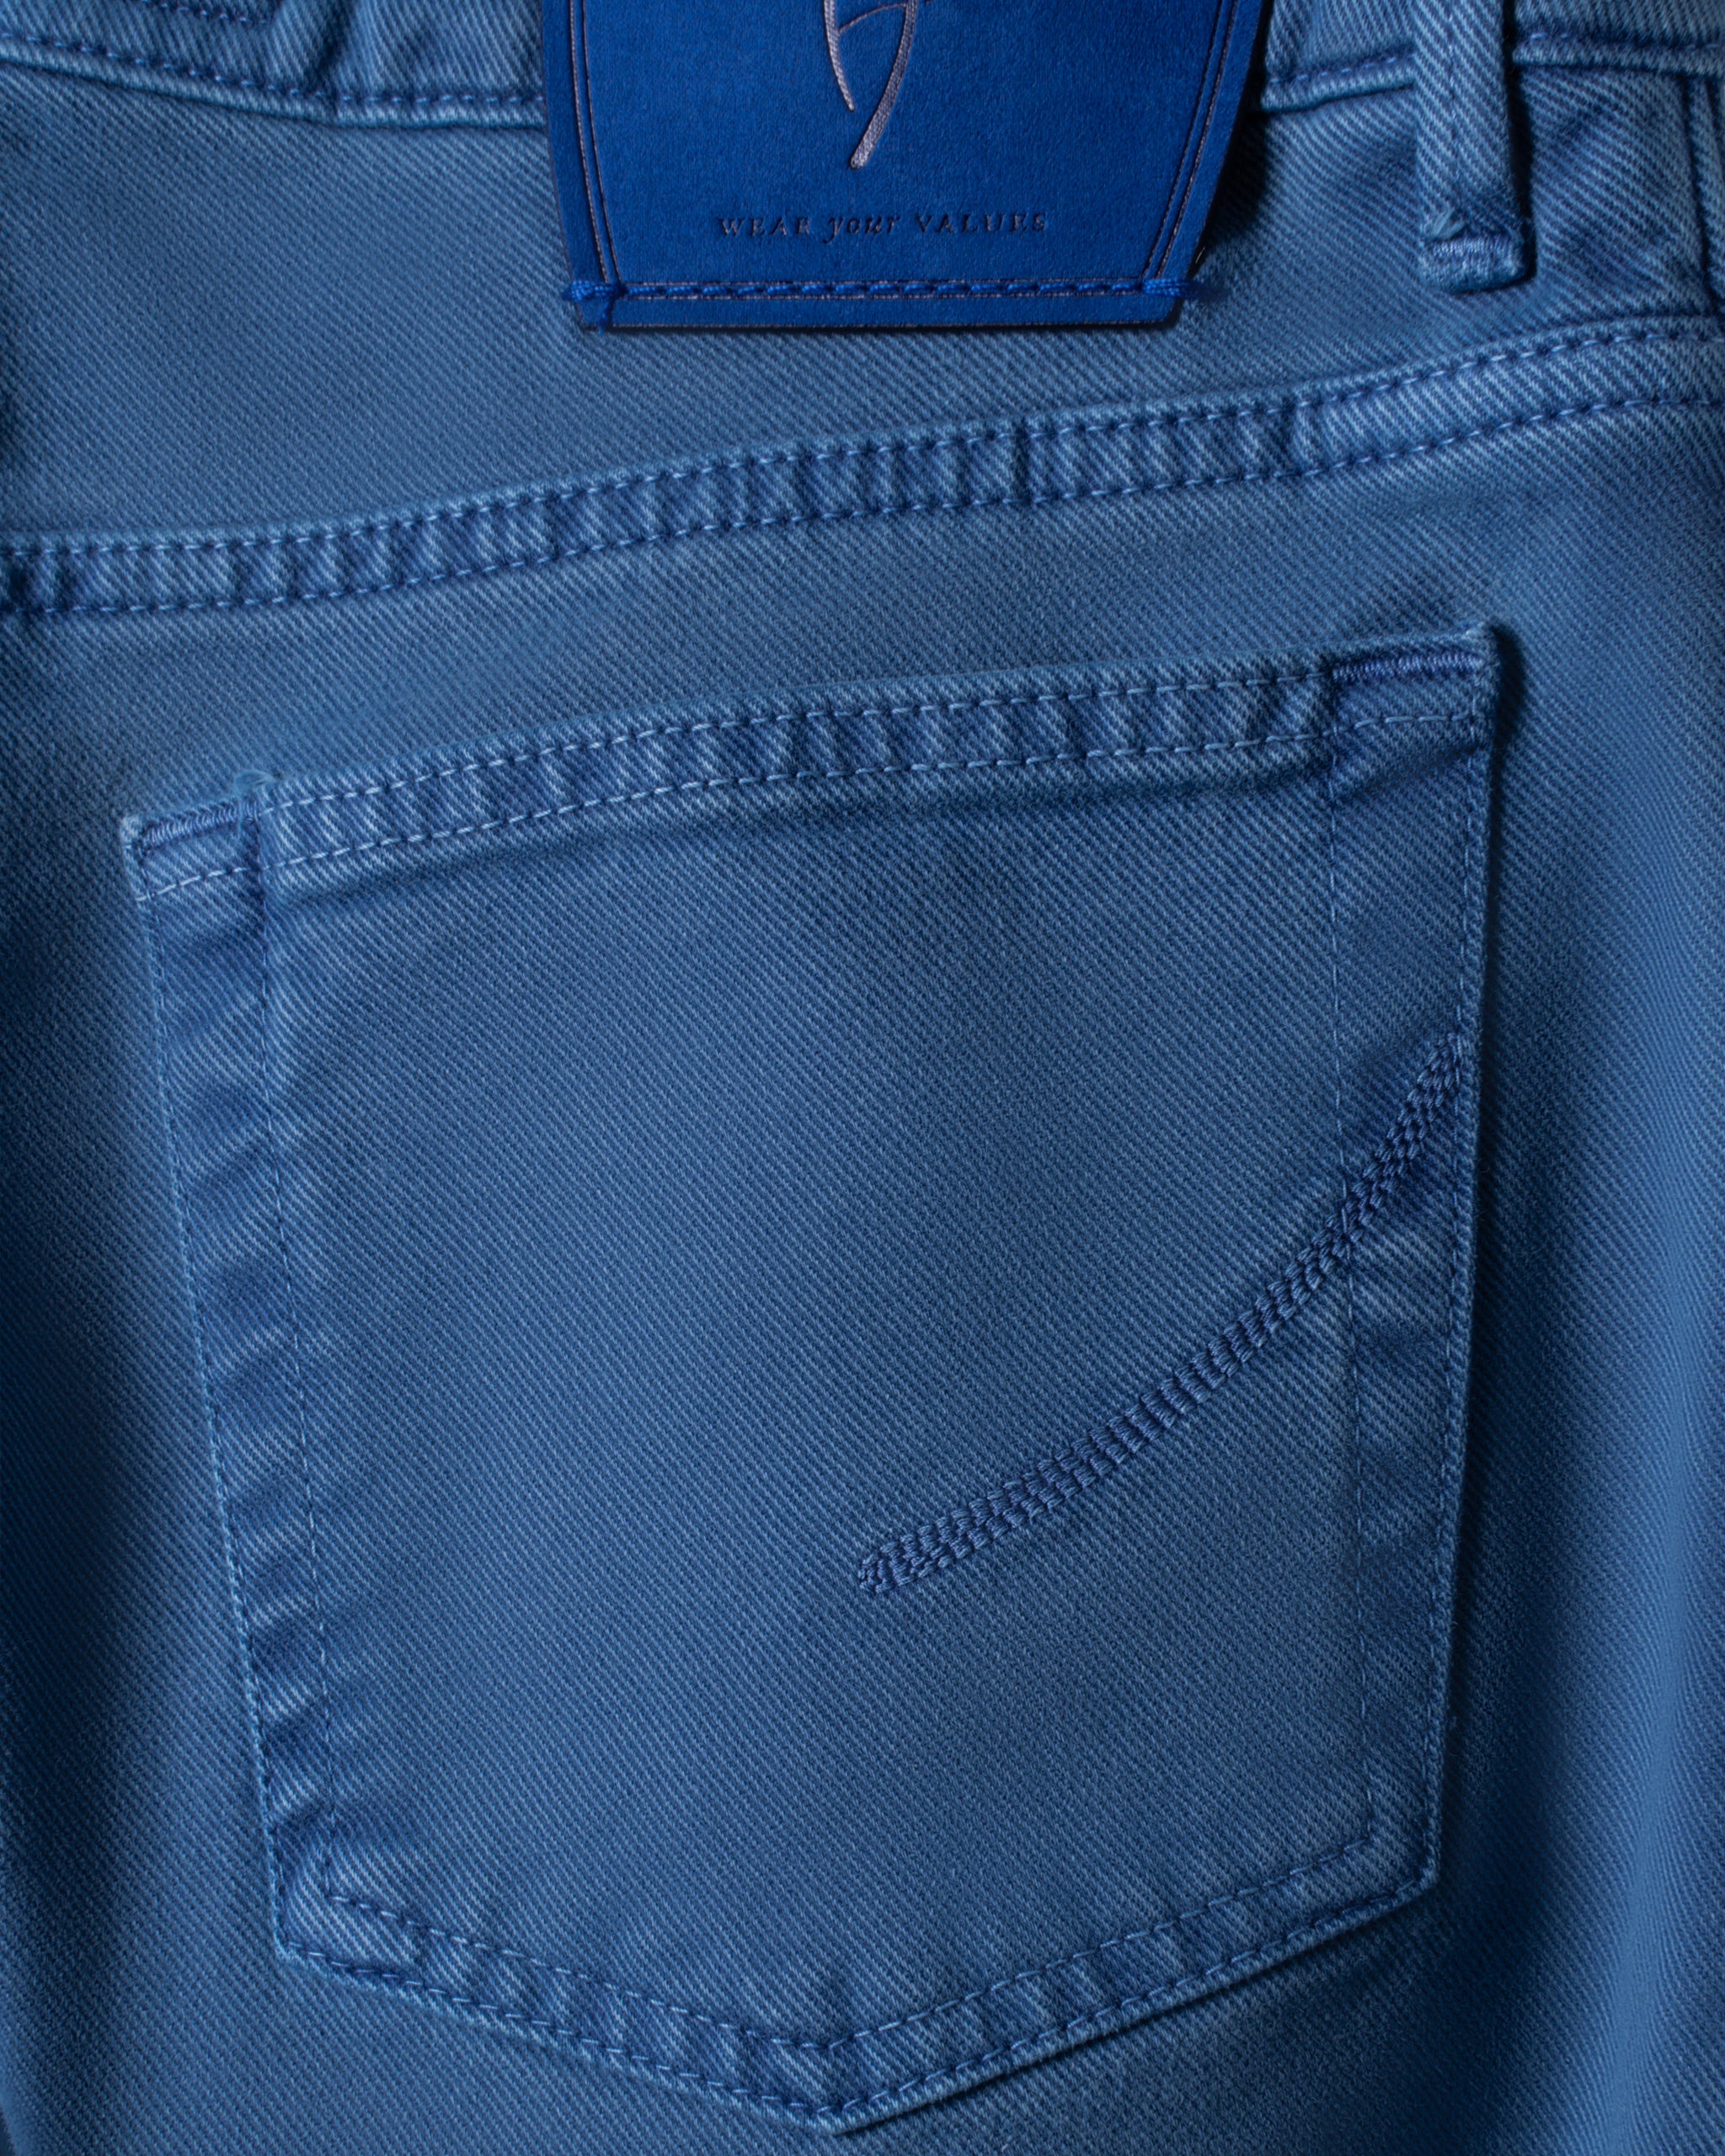 RAVELLO BLUE SUEDE LEATHER PANTS